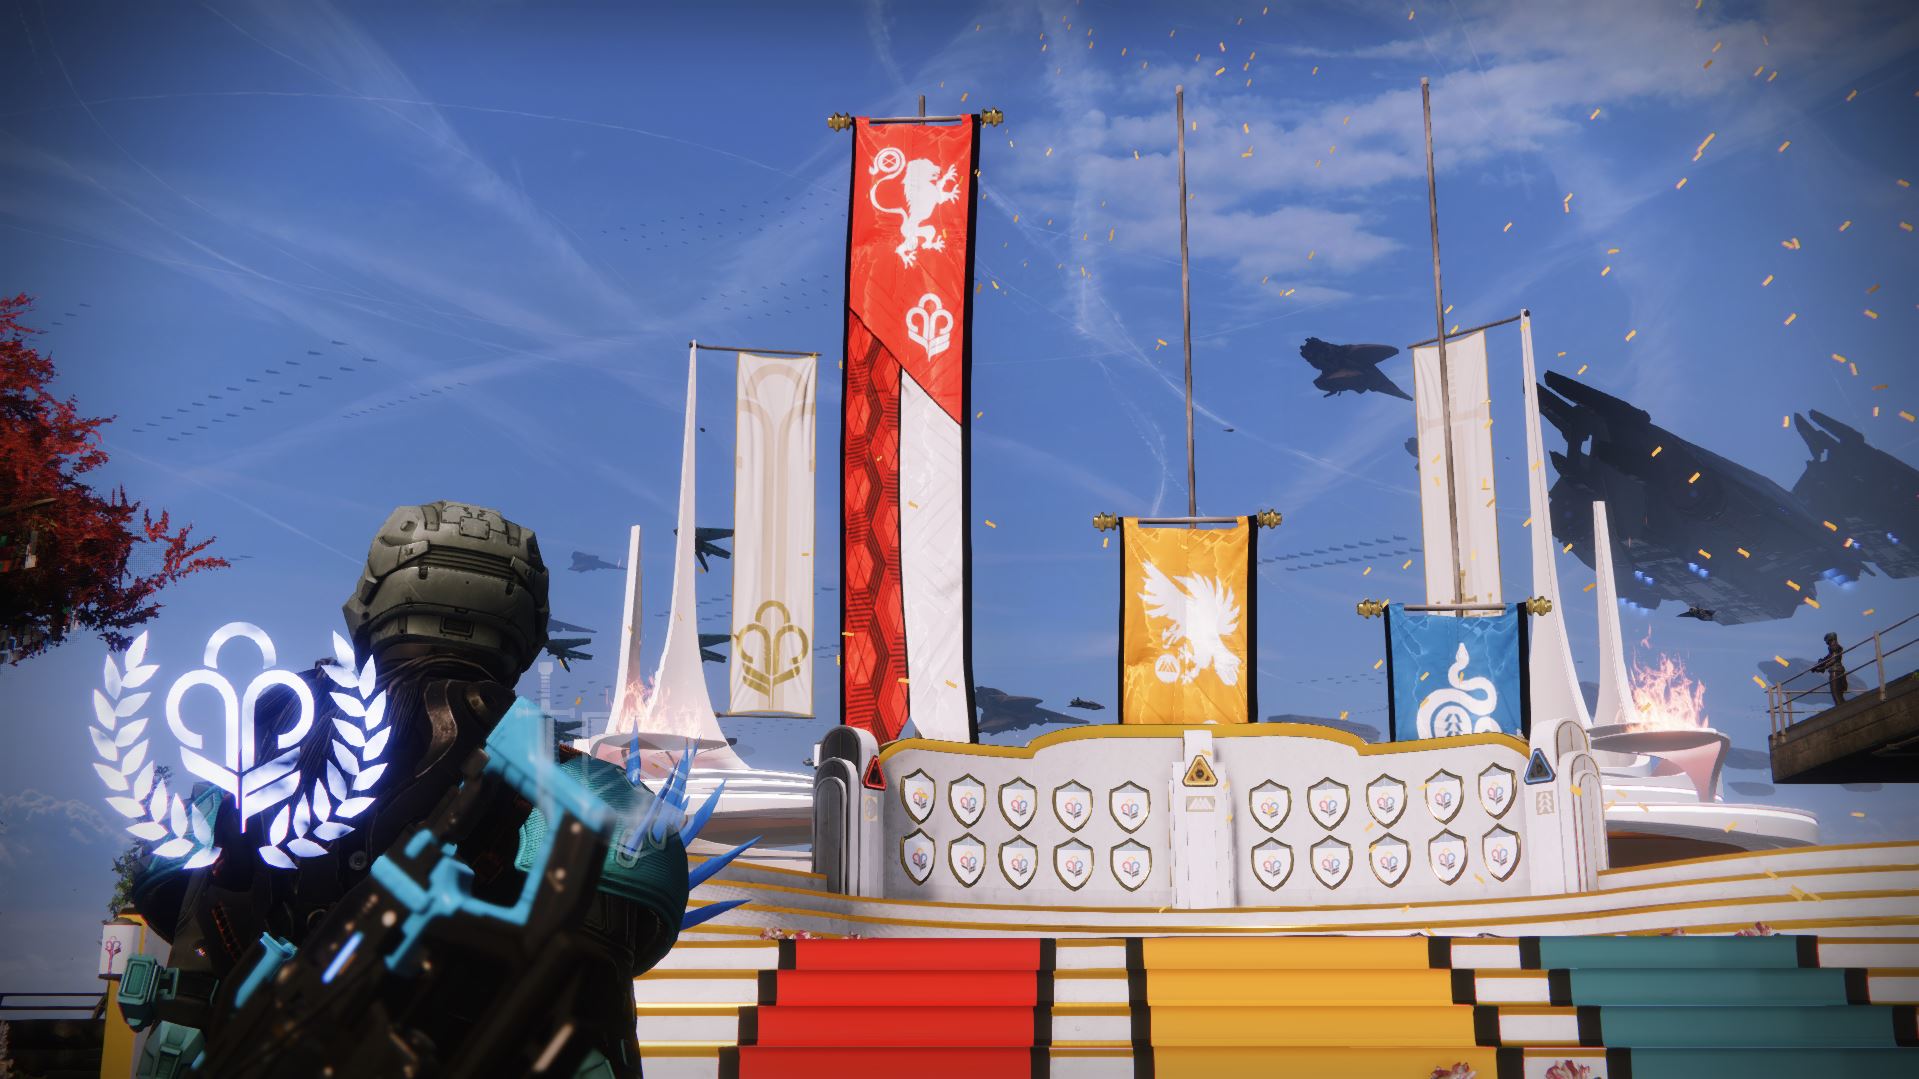 Destiny 2 Players Honor Late Voice Actor Lance Reddick During Guardian Games Event